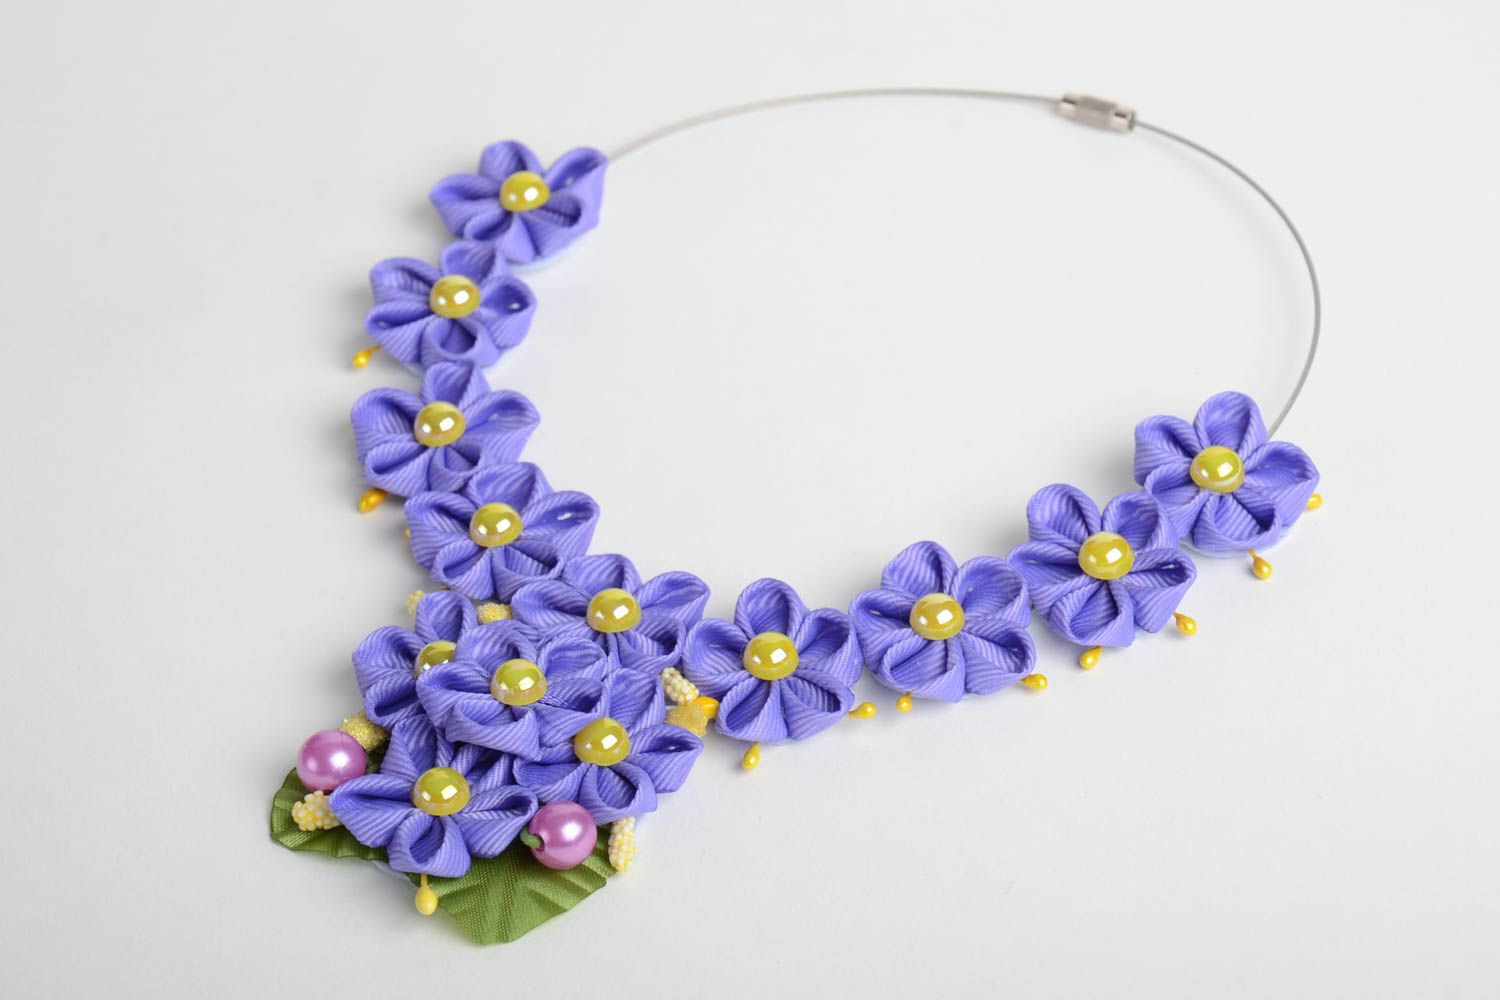 Handmade designer necklace with violet rep ribbon kanzashi flowers and beads photo 5